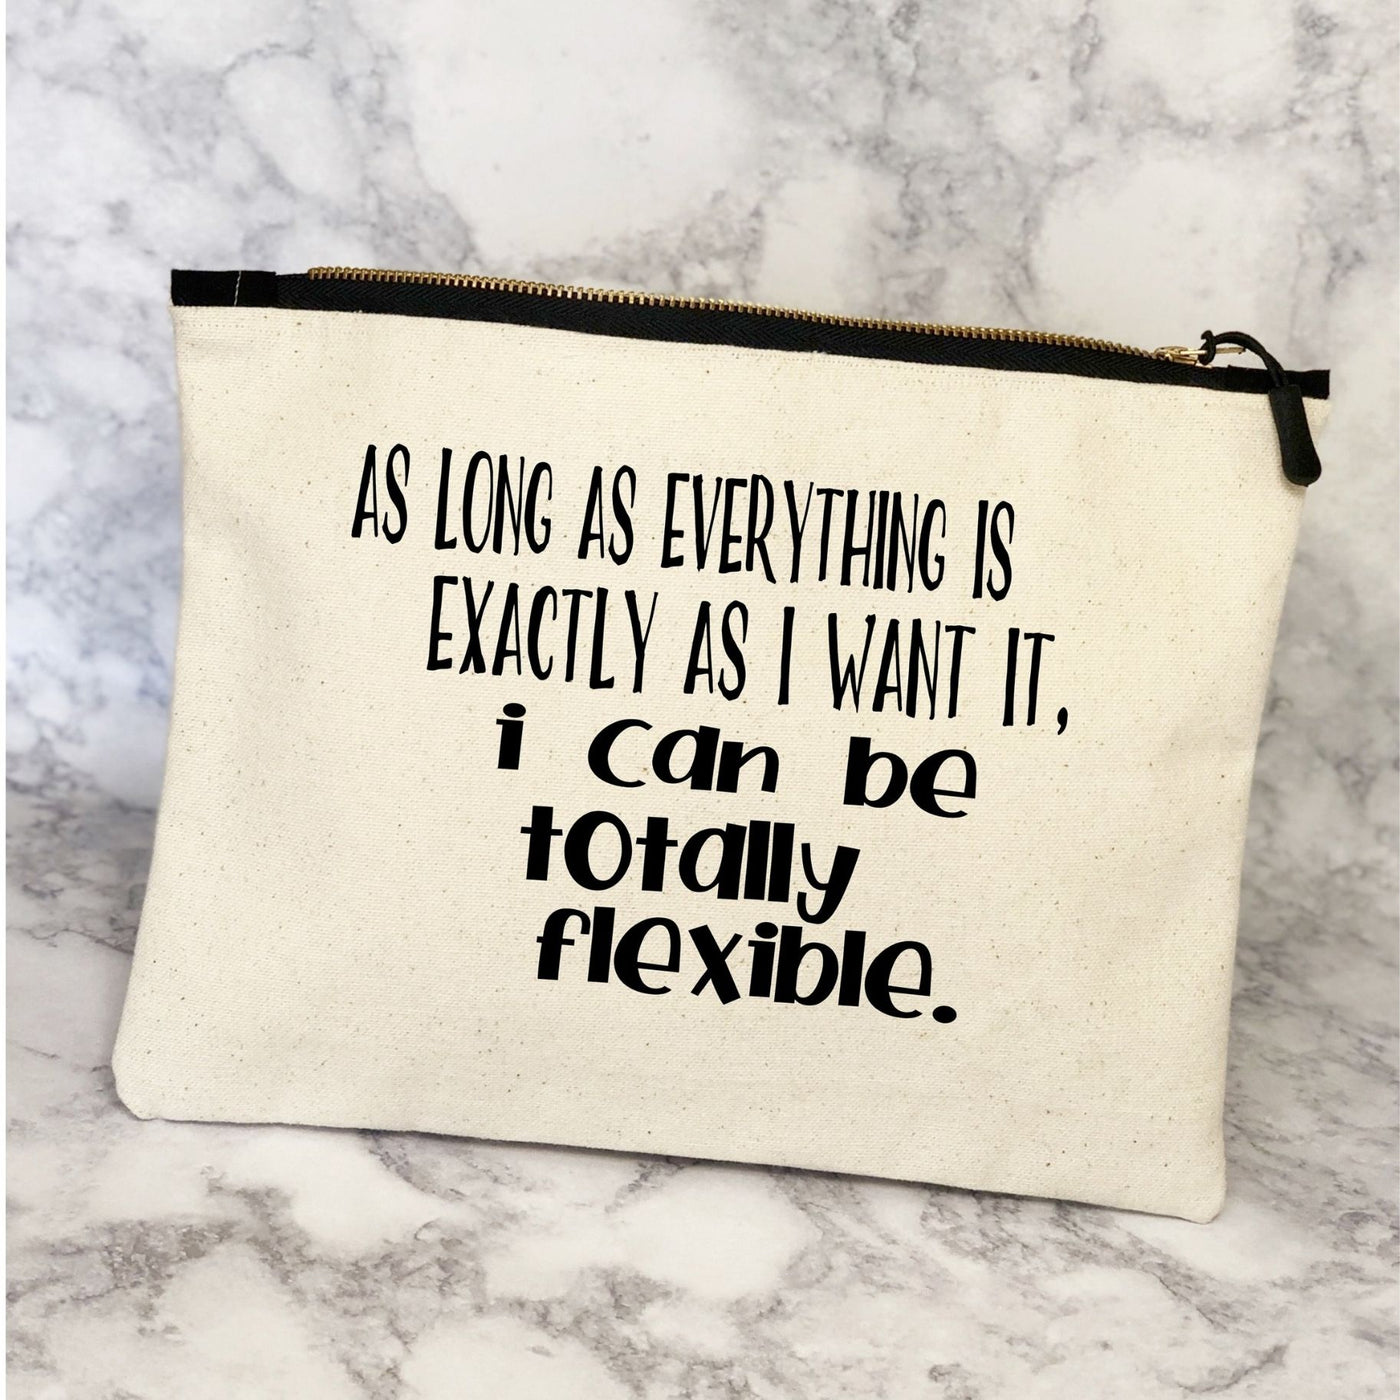 i can be totally flexible - canvas zip bag